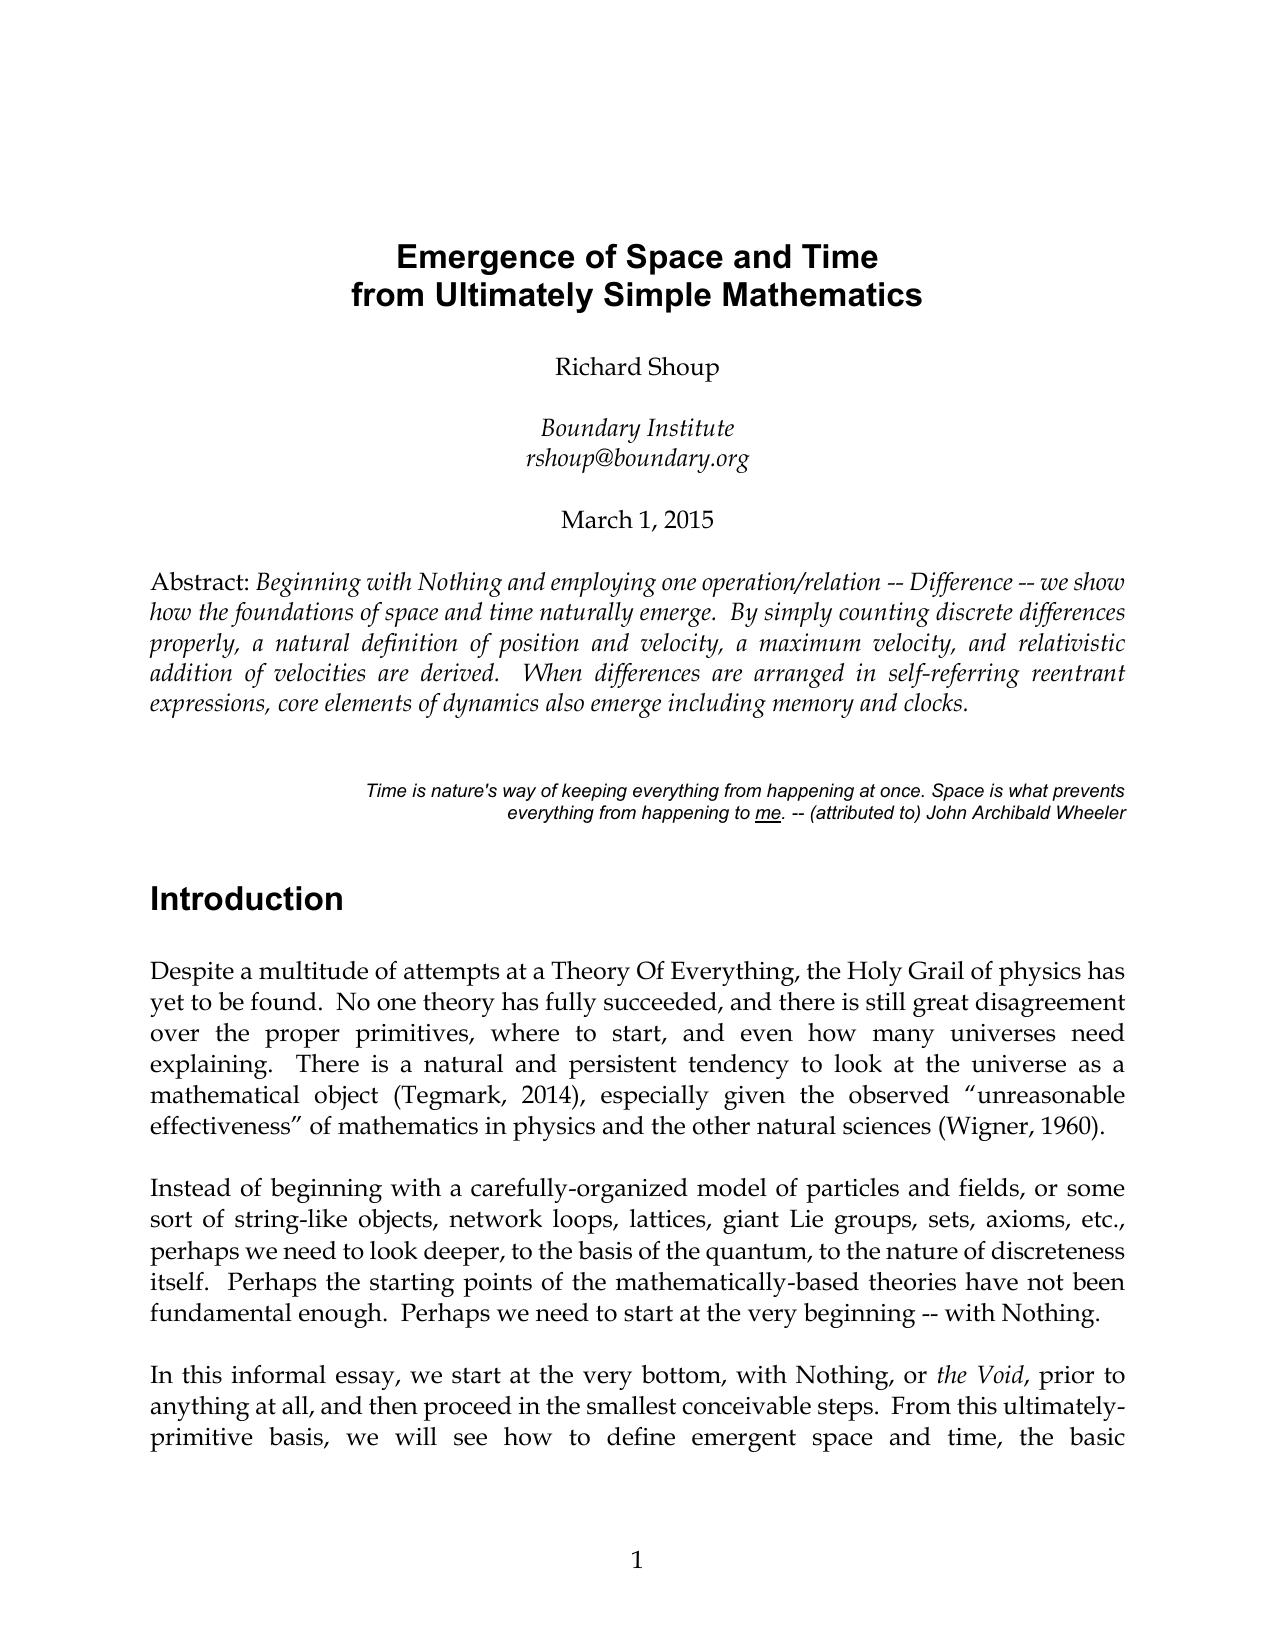 Emergence of Space and Time from Ultimately Simple Mathematics - Paper